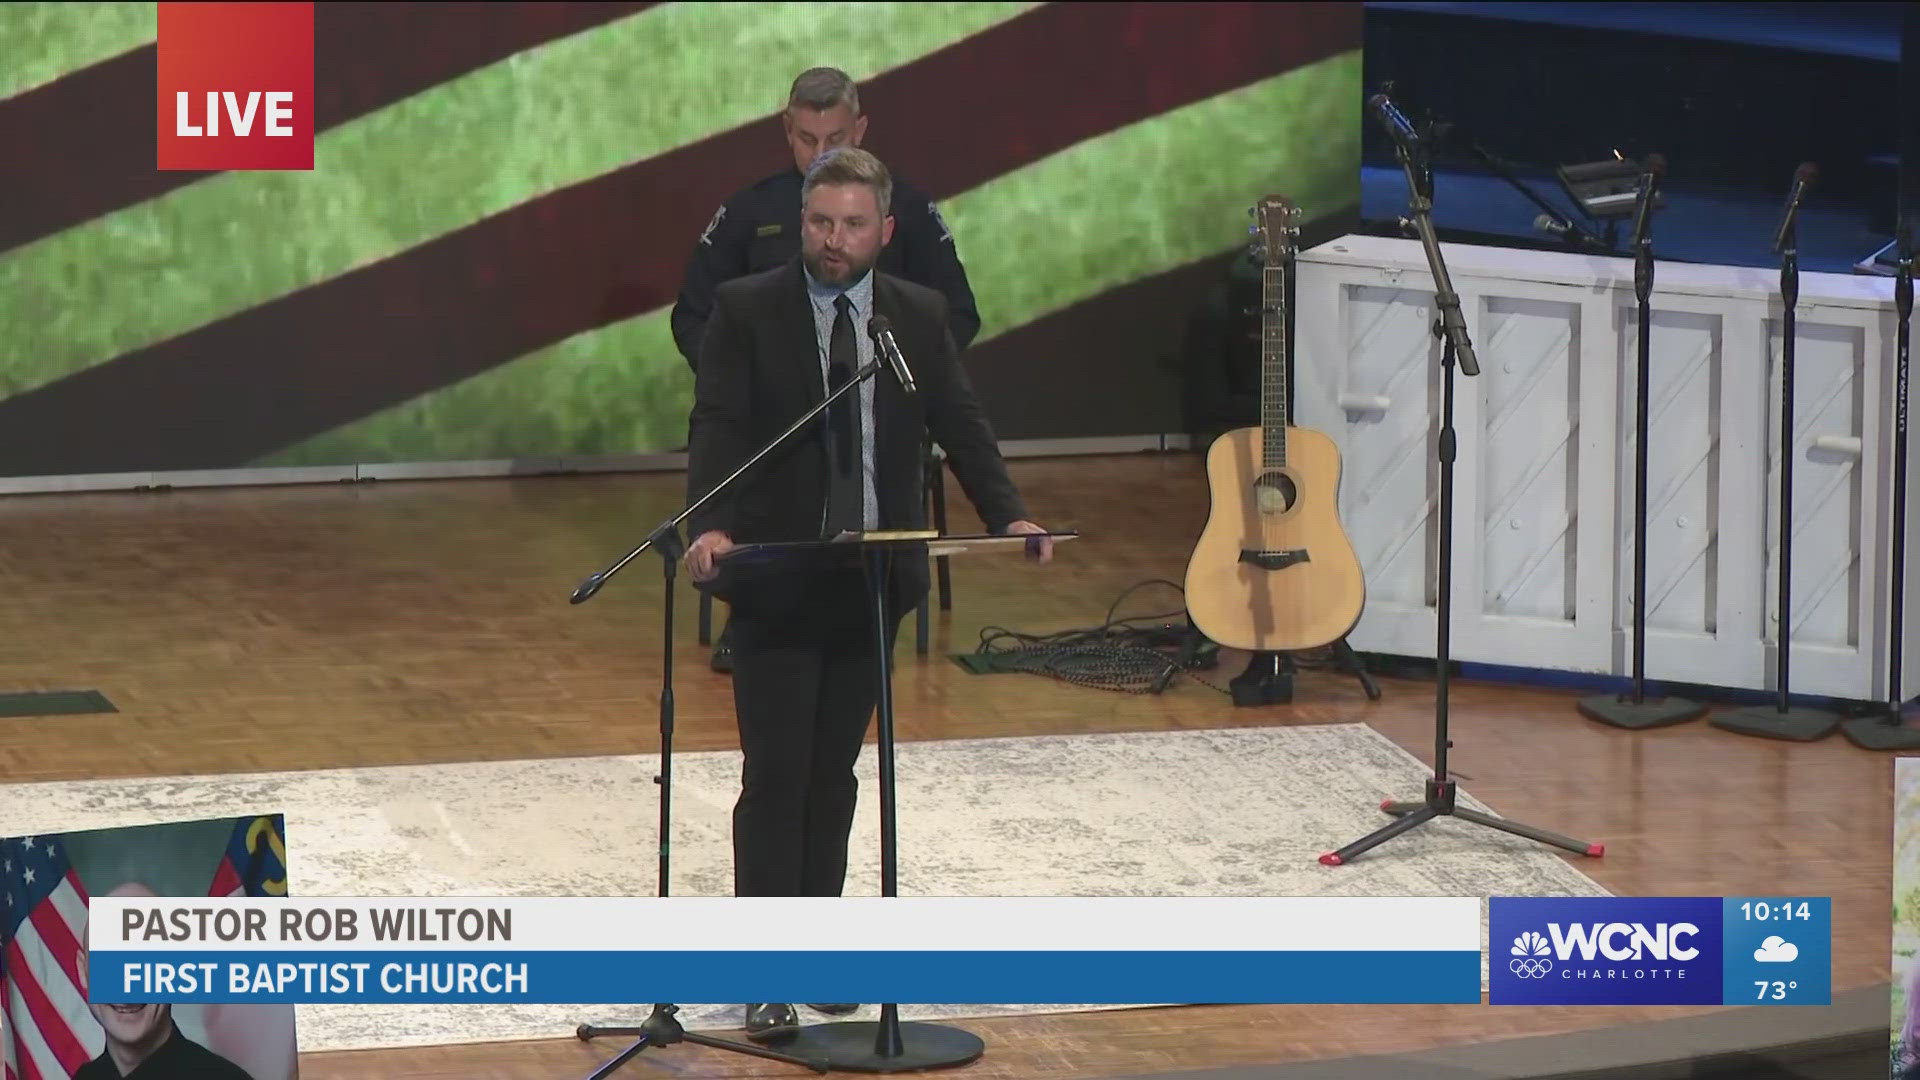 Pastor Bob Wilton pays tribute to fallen CMPD Officer Joshua Eyer, who was killed in the line of duty.